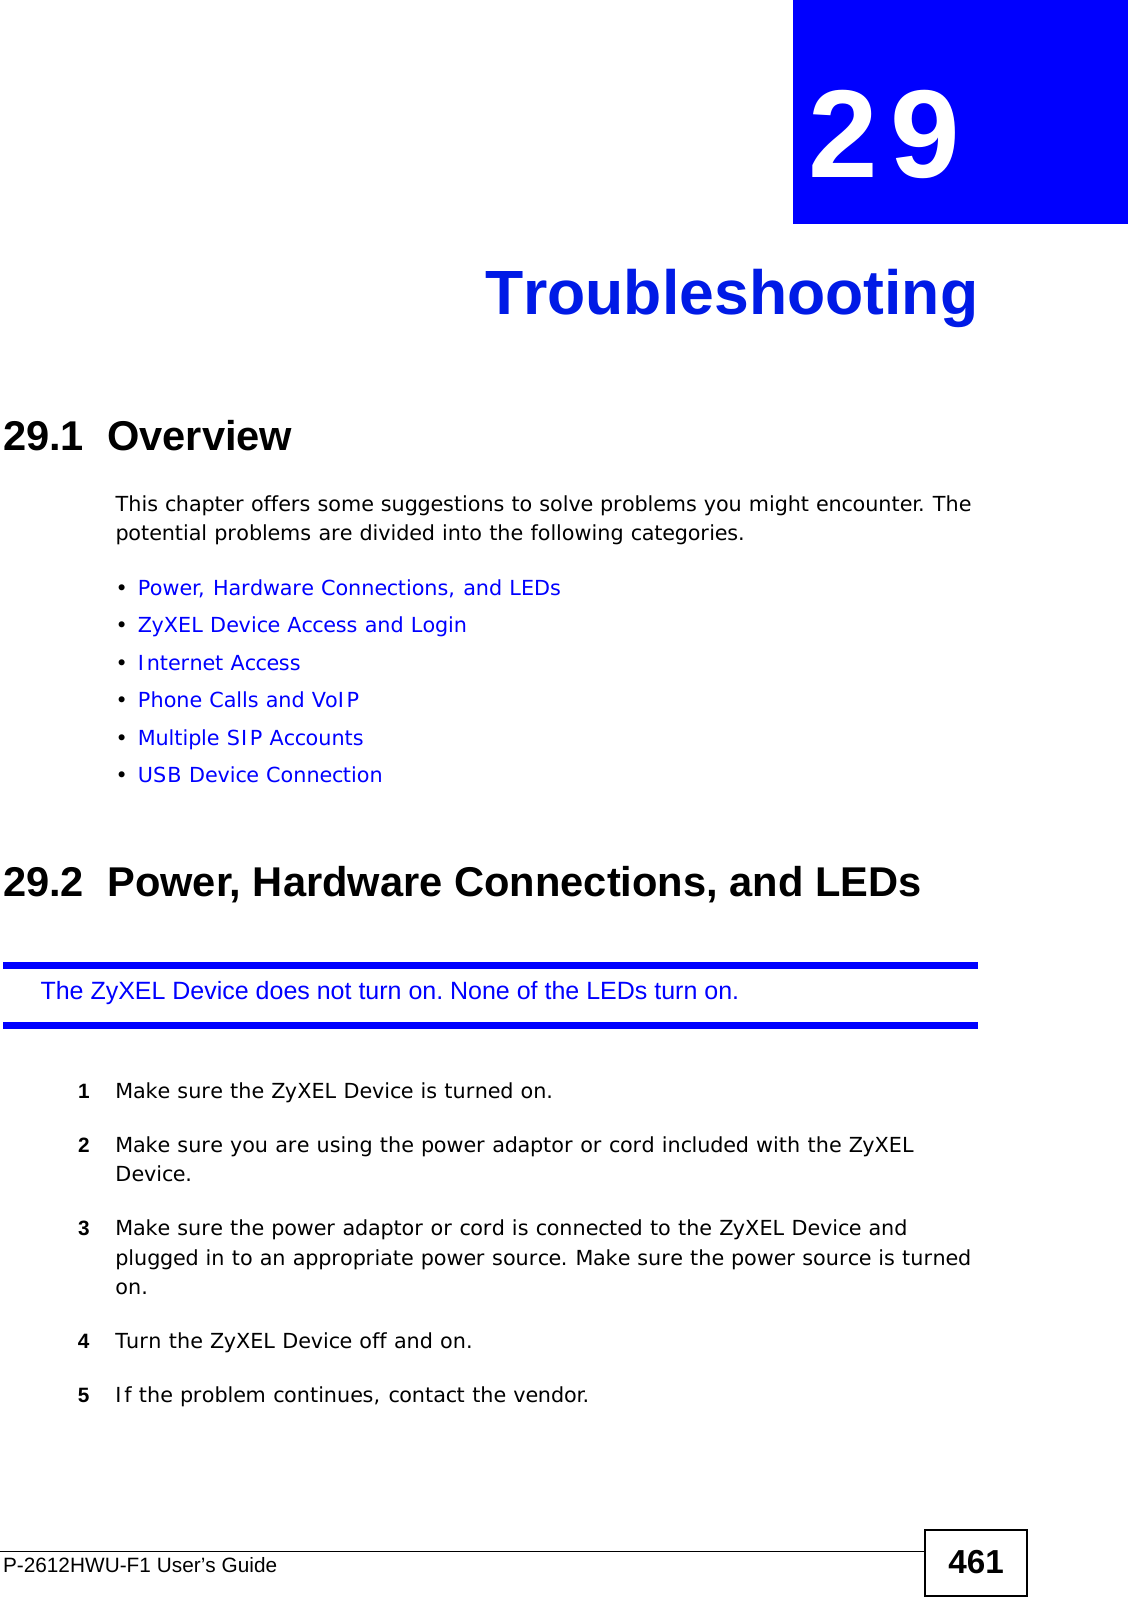 P-2612HWU-F1 User’s Guide 461CHAPTER  29 Troubleshooting29.1  OverviewThis chapter offers some suggestions to solve problems you might encounter. The potential problems are divided into the following categories. •Power, Hardware Connections, and LEDs•ZyXEL Device Access and Login•Internet Access•Phone Calls and VoIP•Multiple SIP Accounts•USB Device Connection29.2  Power, Hardware Connections, and LEDsThe ZyXEL Device does not turn on. None of the LEDs turn on.1Make sure the ZyXEL Device is turned on. 2Make sure you are using the power adaptor or cord included with the ZyXEL Device.3Make sure the power adaptor or cord is connected to the ZyXEL Device and plugged in to an appropriate power source. Make sure the power source is turned on.4Turn the ZyXEL Device off and on. 5If the problem continues, contact the vendor.